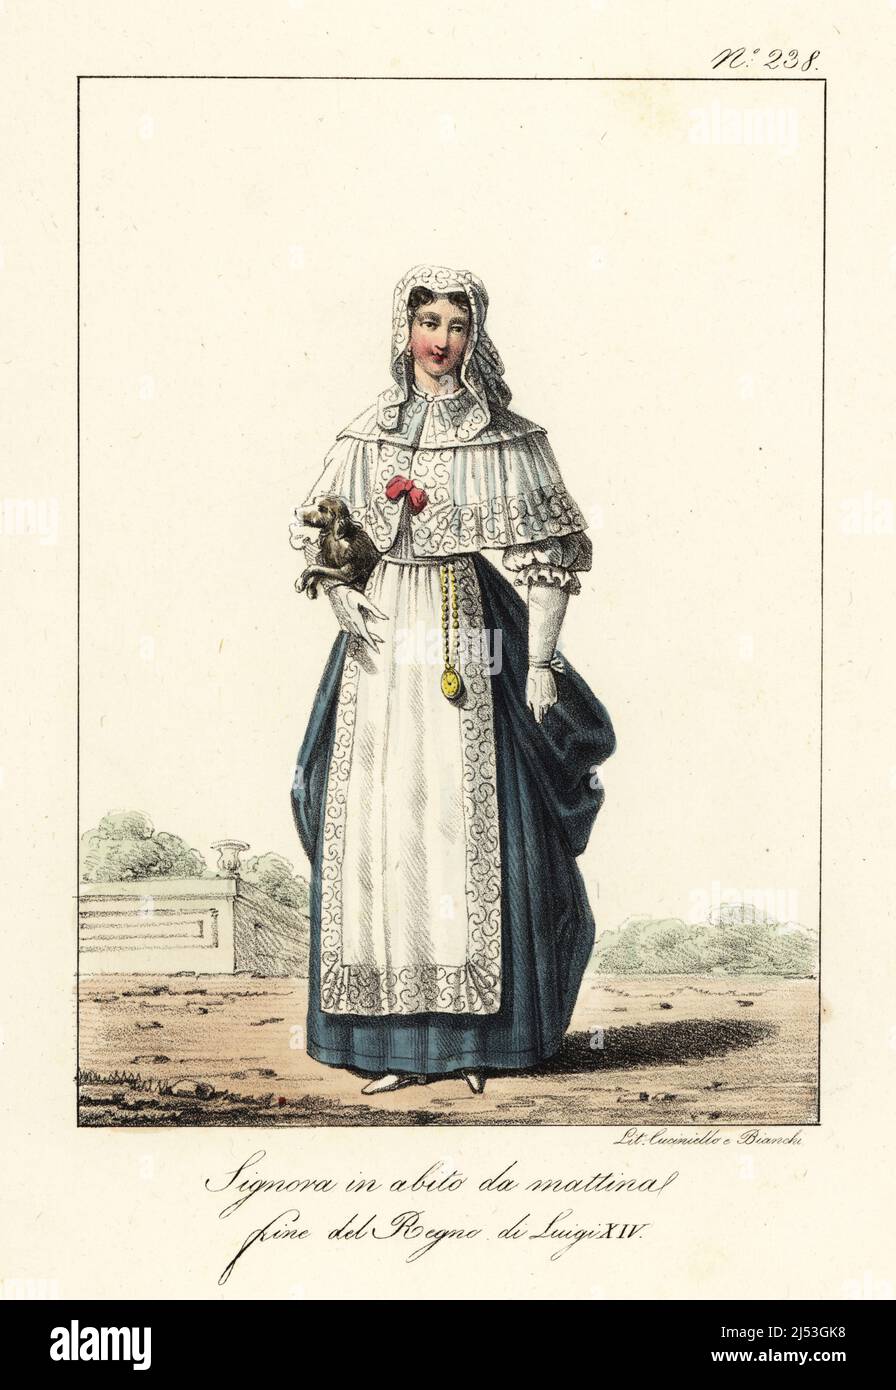 Woman in morning dress, end of the reign of King Louis XIV of France. In lace veil, lace cape, blue dress, lace apron, gold watch on a chain, with toy dog under her arm. Dame en Deshabille du matin, fin du Regne de Louis XIV. Handcoloured lithograph by Lorenzo Bianchi and Domenico Cuciniello after Hippolyte Lecomte from Costumi civili e militari della monarchia francese dal 1200 al 1820, Naples, 1825. Italian edition of Lecomte’s Civilian and military costumes of the French monarchy from 1200 to 1820. Stock Photo